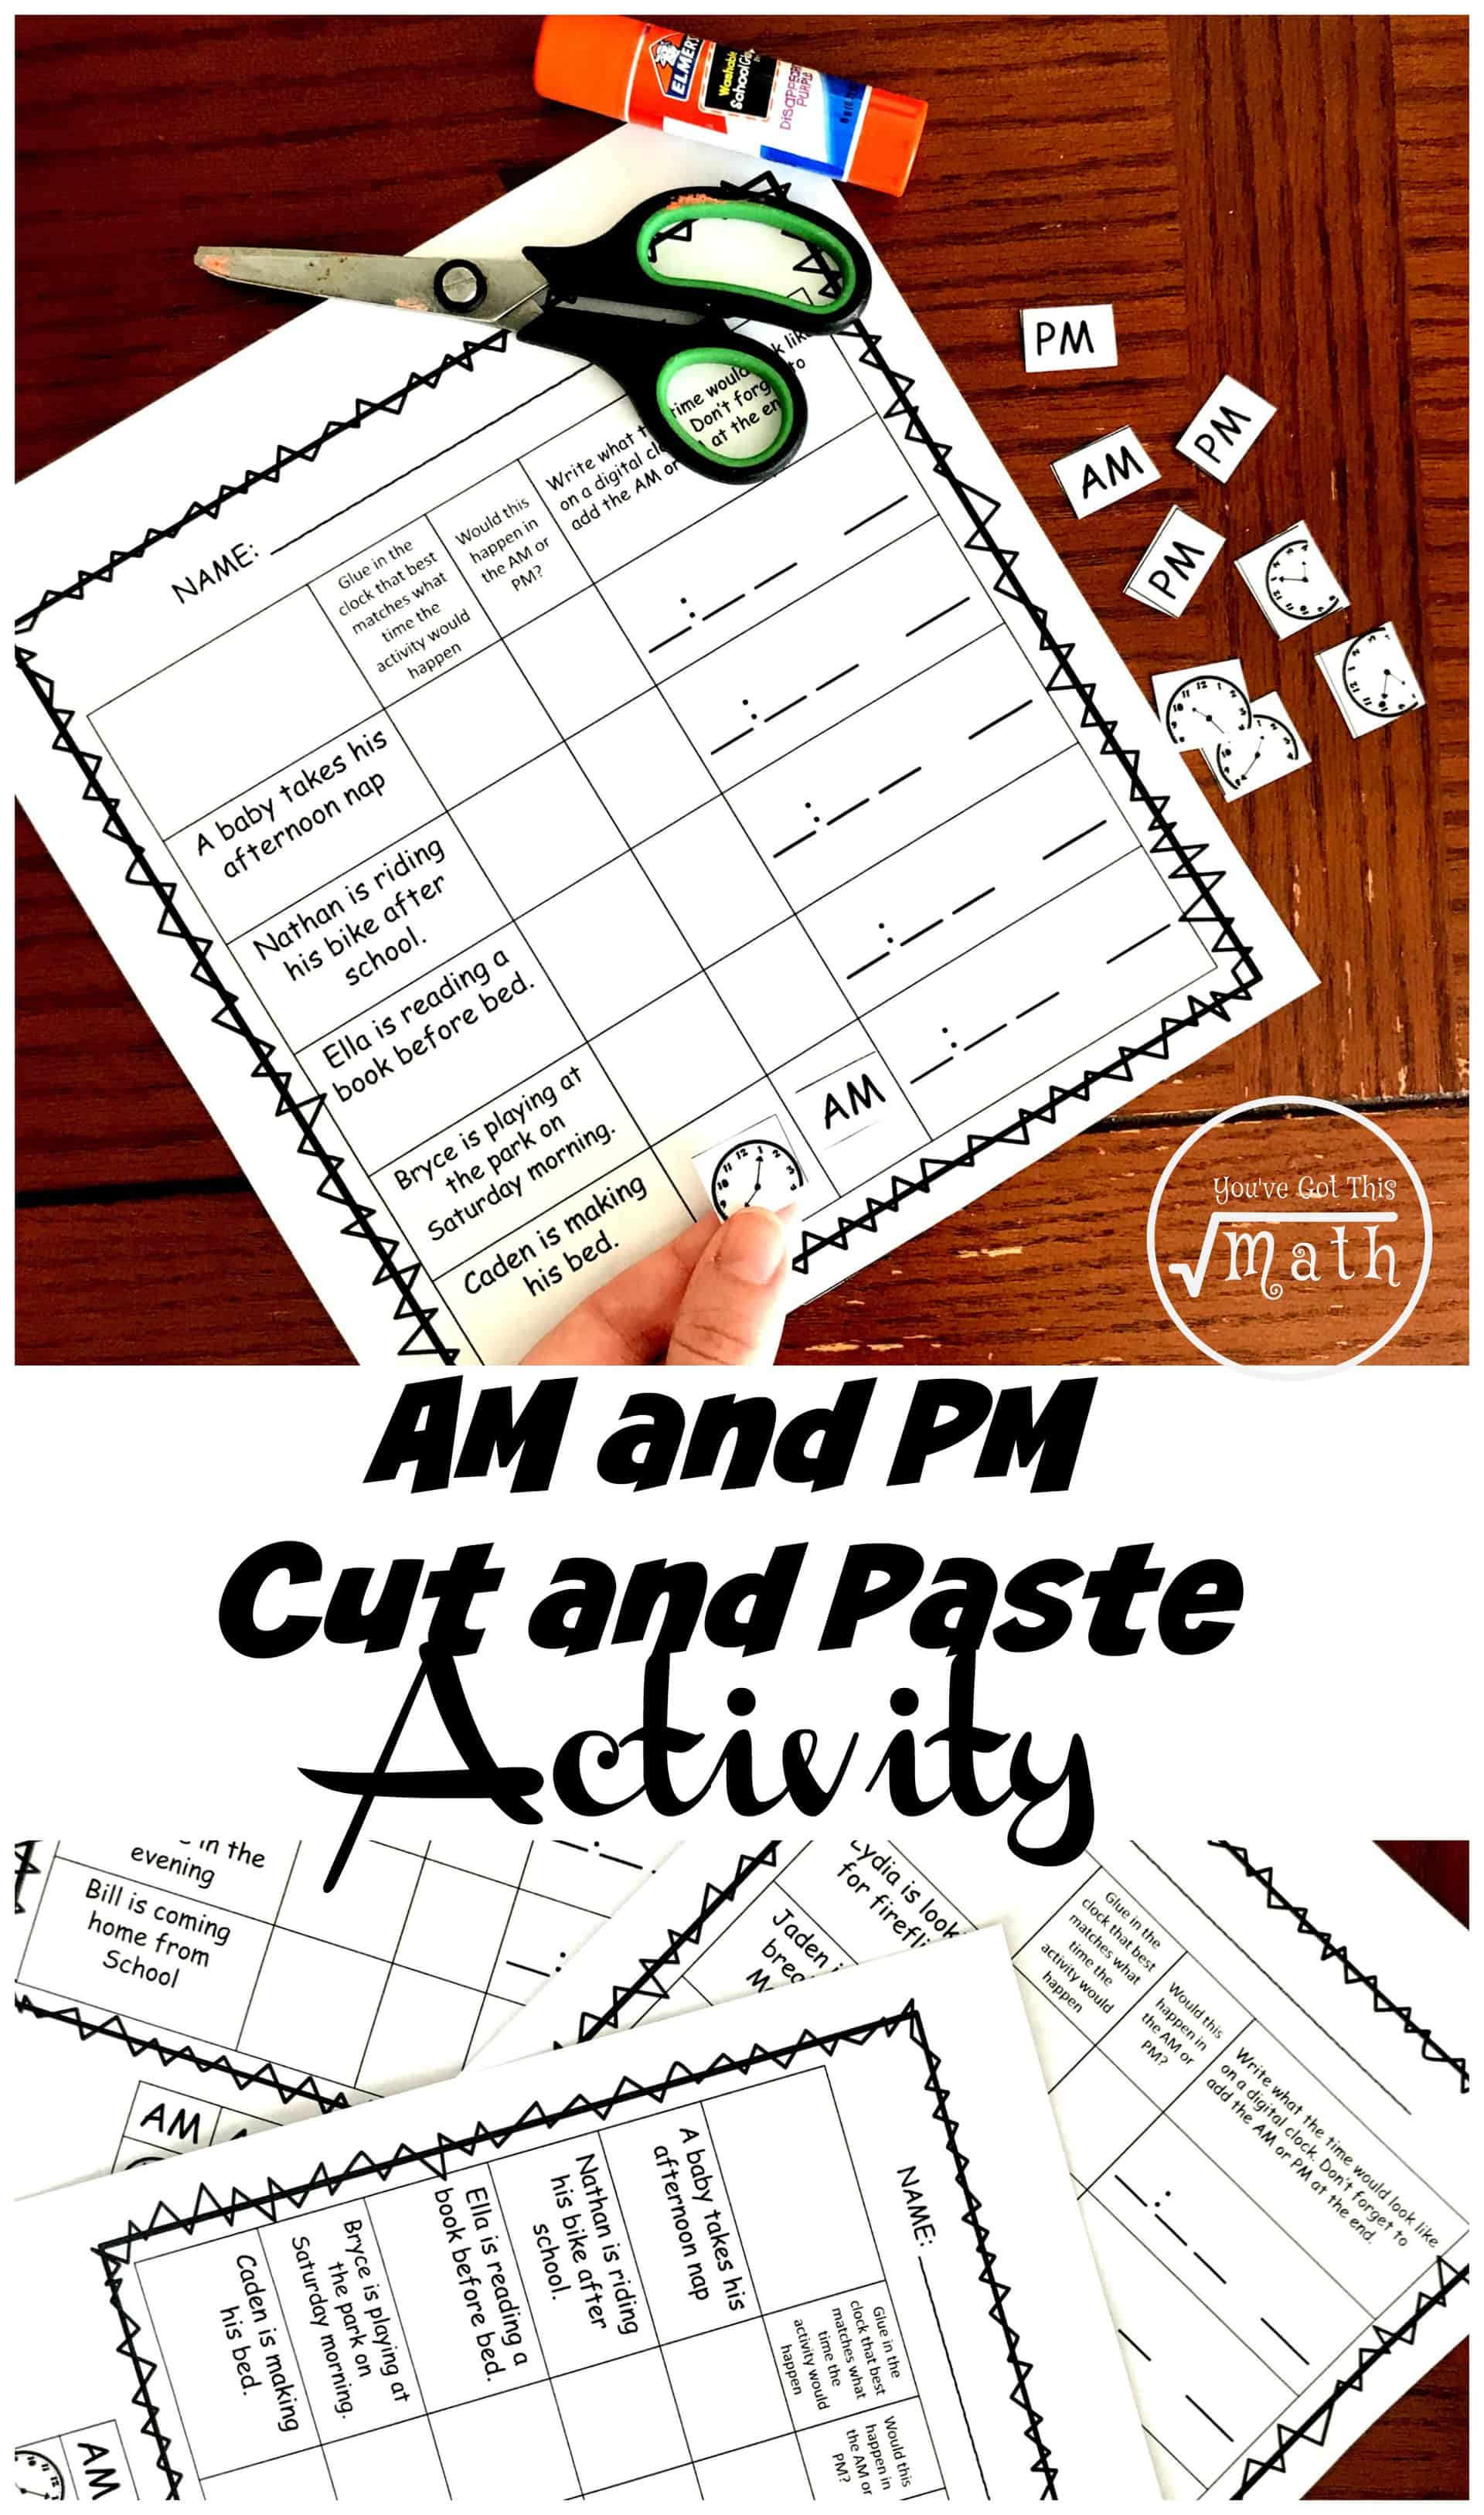 These am and pm worksheets have children figuring out times they would perform an activity and if it would be am or pm. While working on the worksheet they will also be reading analog clocks in five-minute increments.